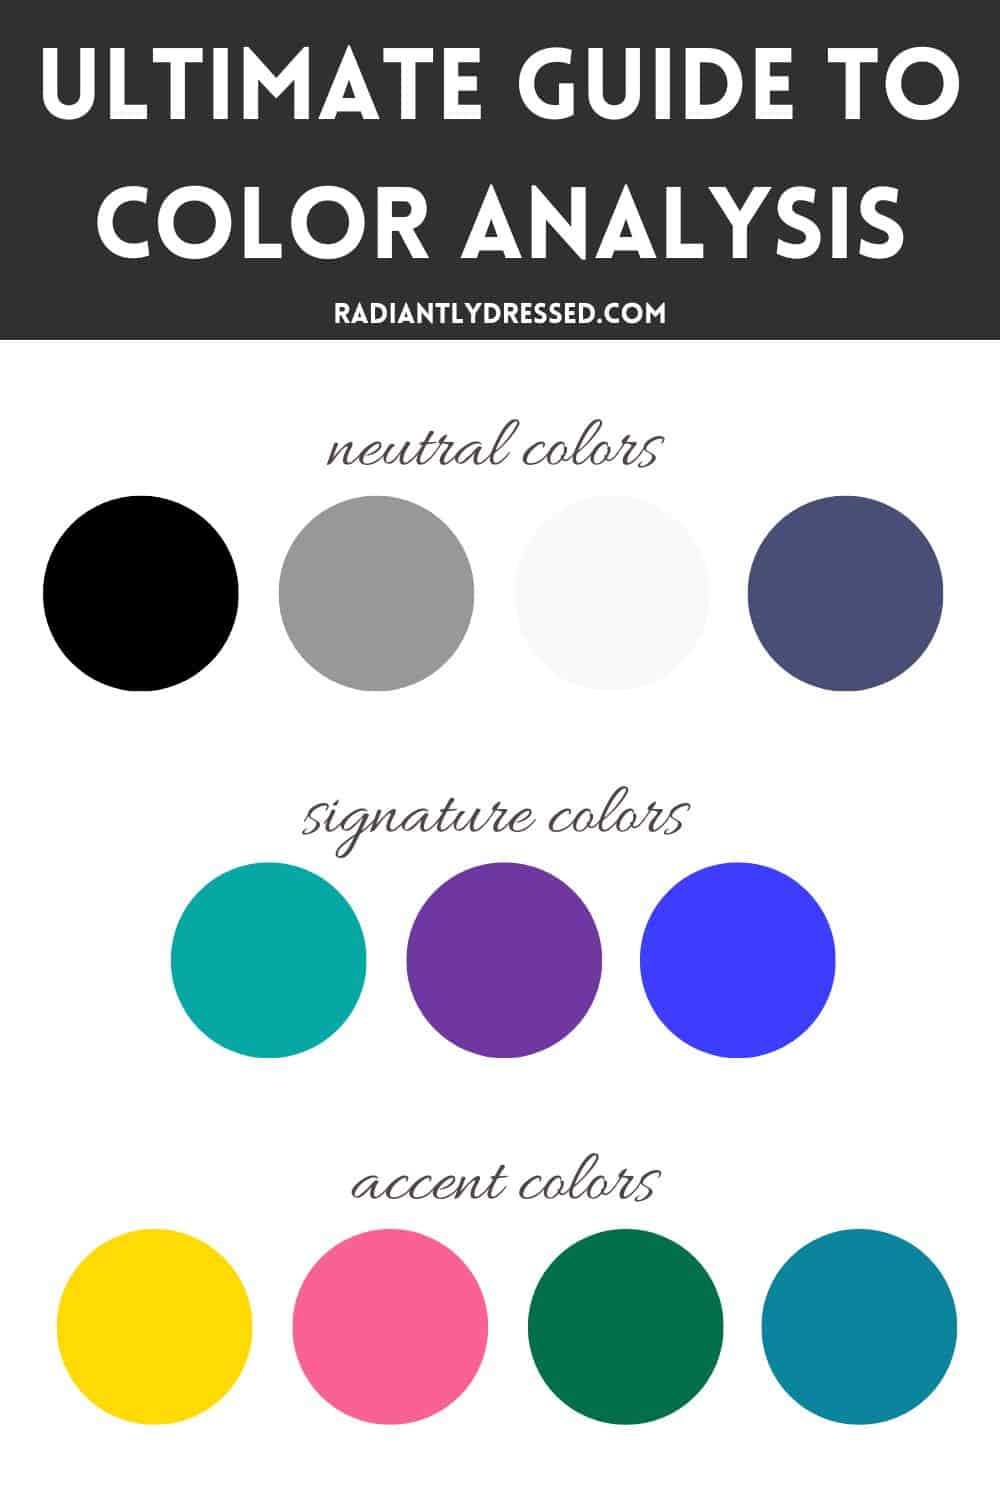 What Is a Personal Color Analysis?